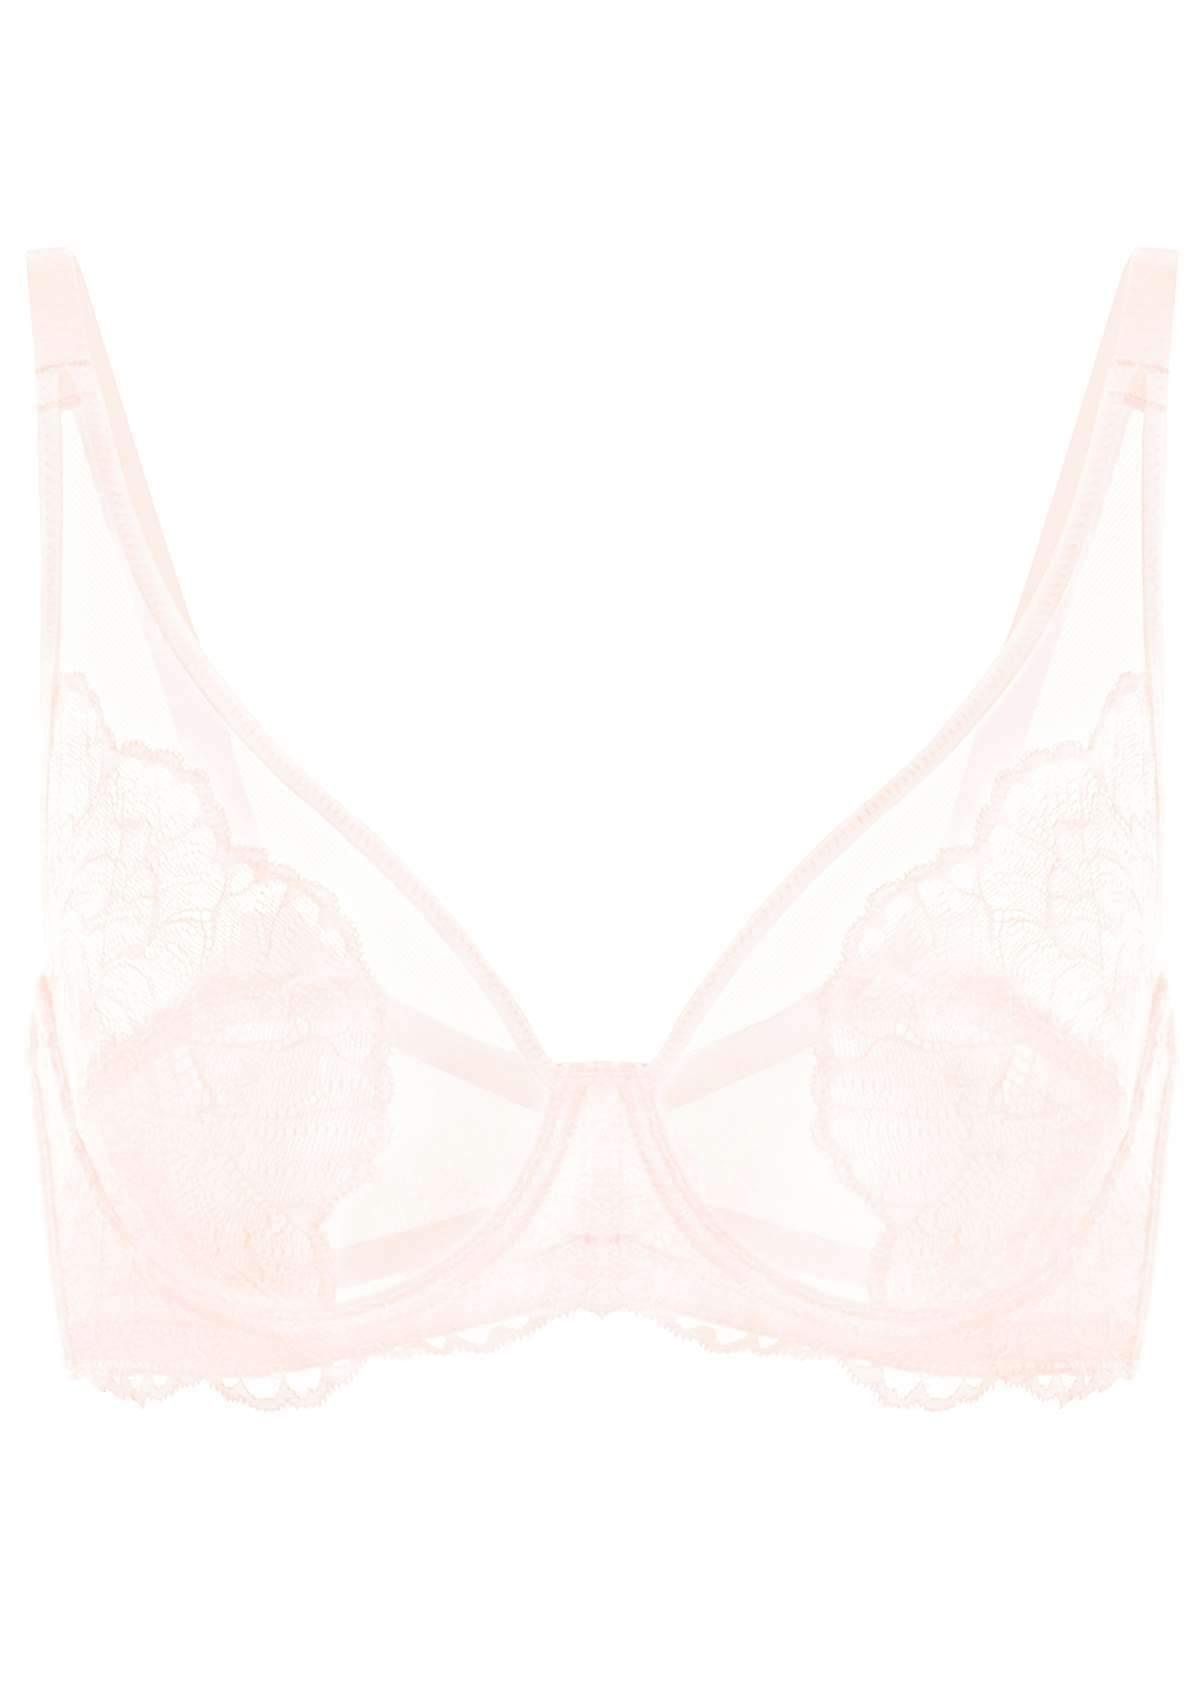 HSIA Blossom Sheer Lace Bra: Comfortable Underwire Bra For Big Busts - White / 44 / DDD/F